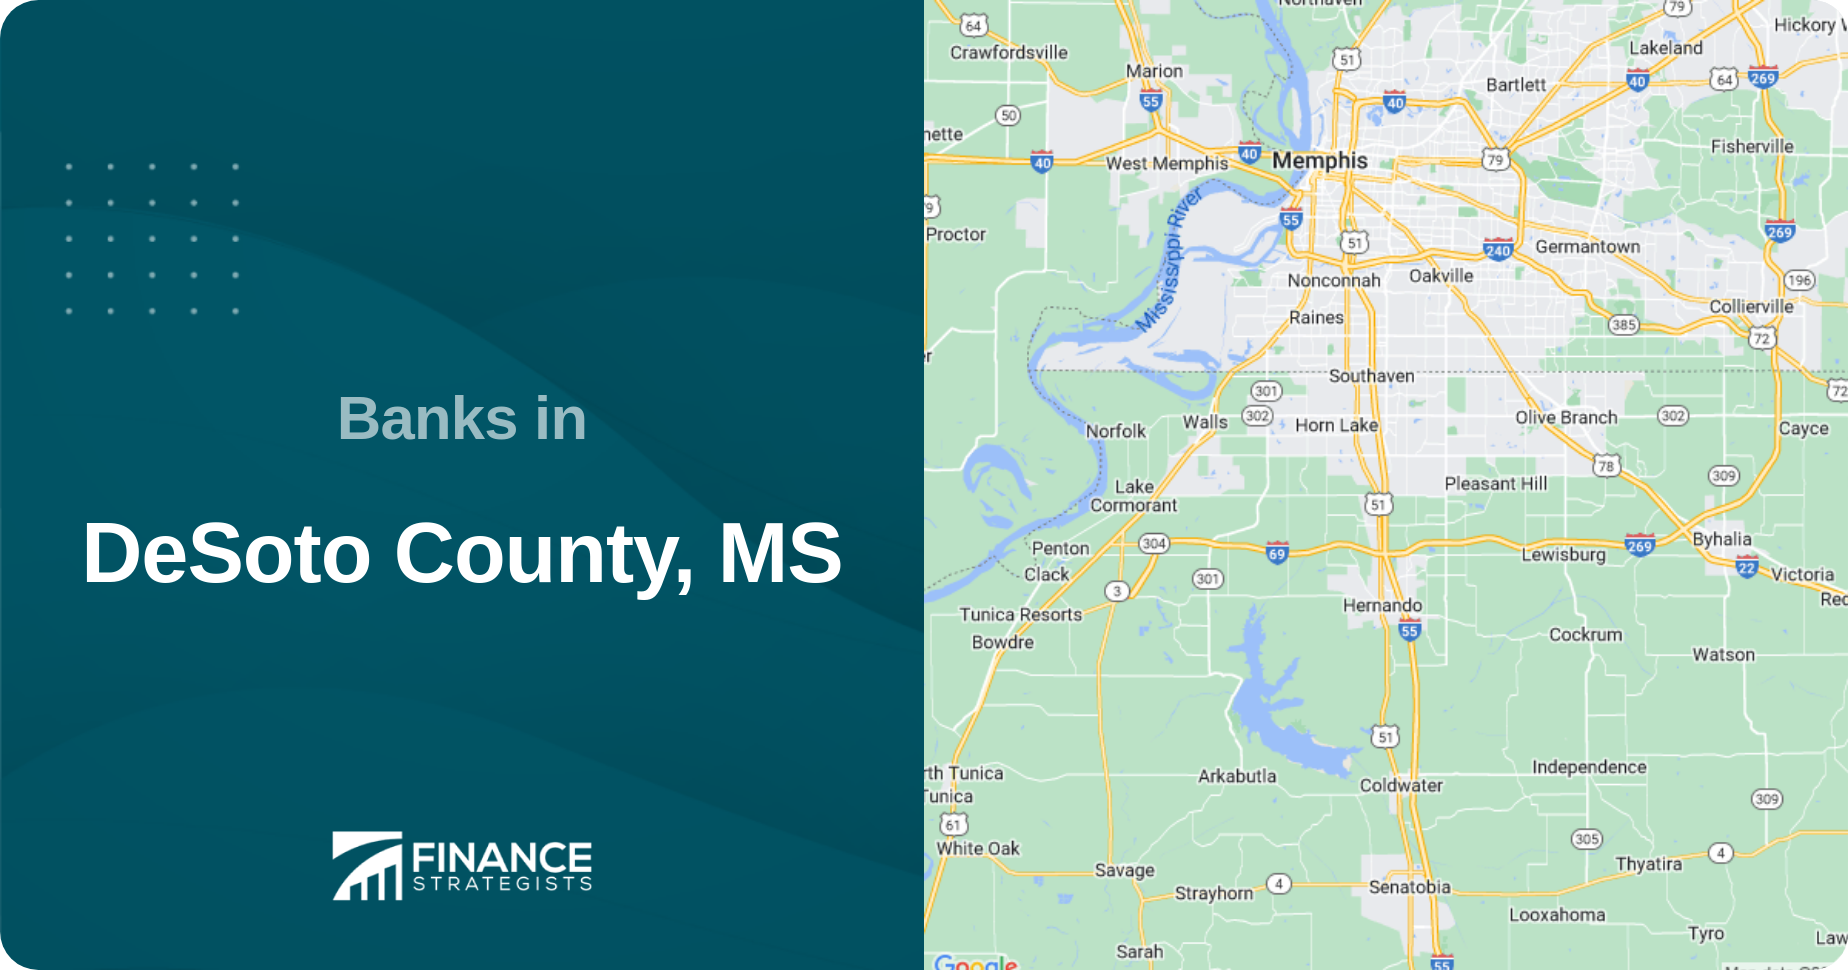 Banks in DeSoto County, MS